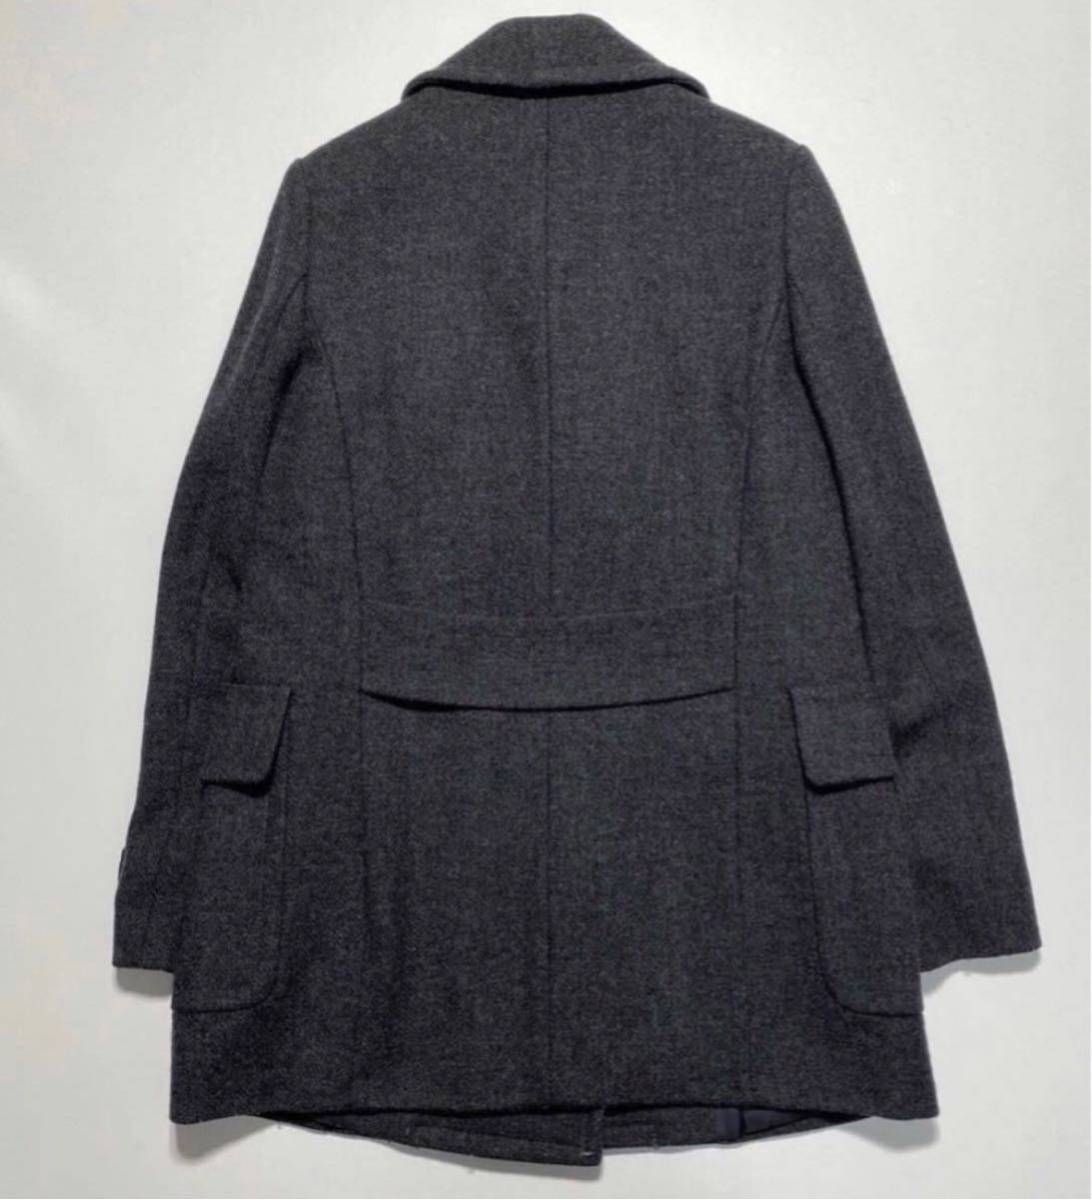 【USA:4】SEE BY CHLOE Distributed by sinv Wool Coat シーバイクロエ ウール コート Pコート (MOD.L.J12500) Y1159_画像2